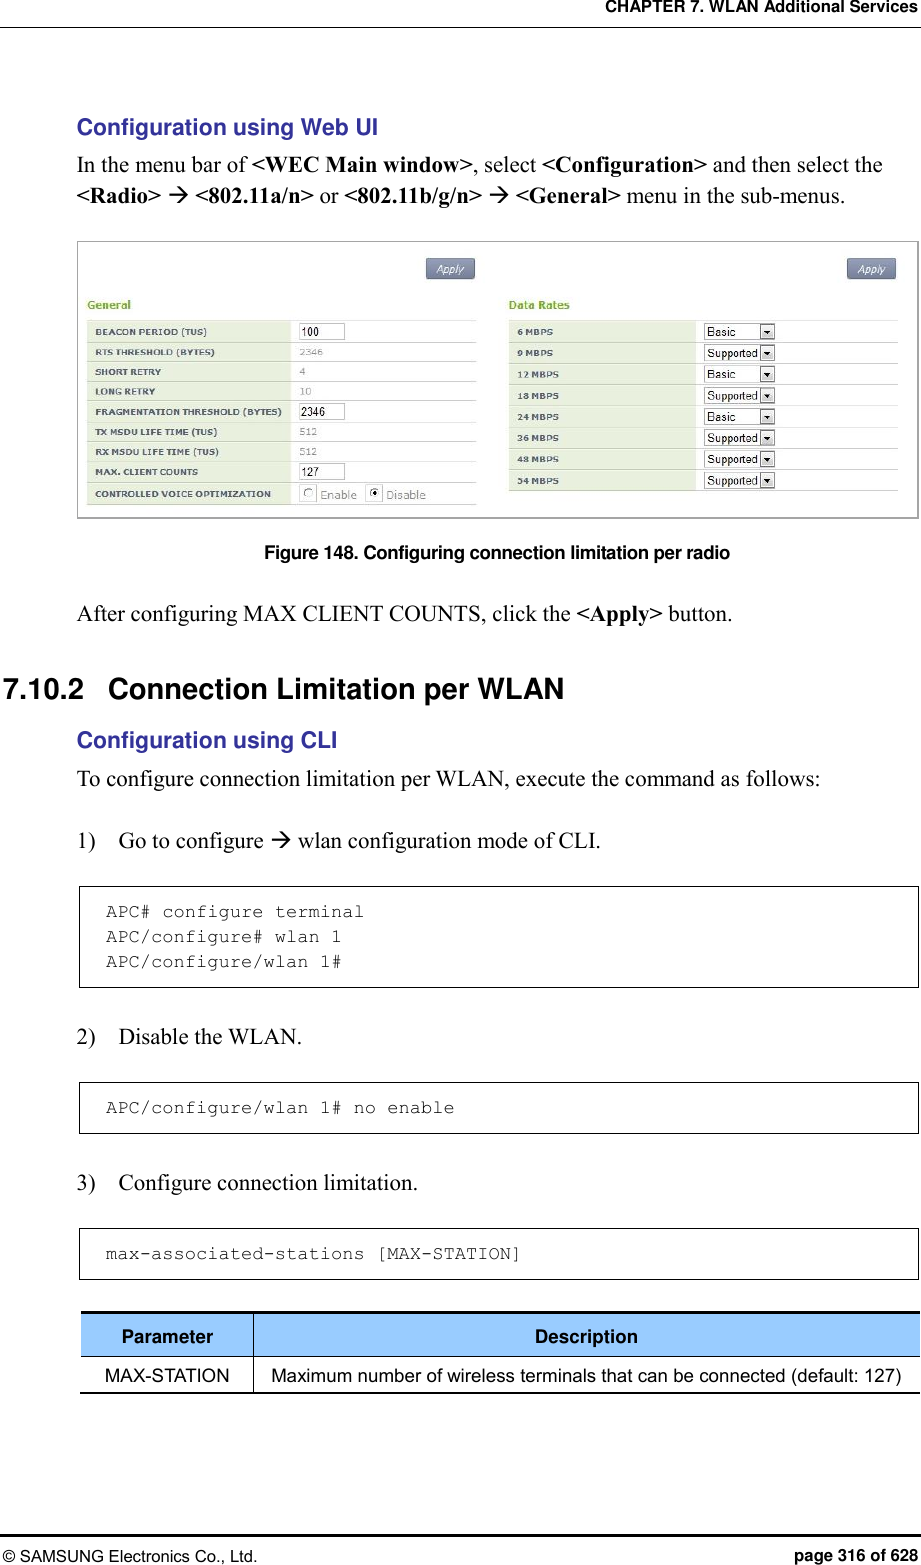 CHAPTER 7. WLAN Additional Services © SAMSUNG Electronics Co., Ltd.  page 316 of 628 Configuration using Web UI In the menu bar of &lt;WEC Main window&gt;, select &lt;Configuration&gt; and then select the &lt;Radio&gt;  &lt;802.11a/n&gt; or &lt;802.11b/g/n&gt;  &lt;General&gt; menu in the sub-menus.  Figure 148. Configuring connection limitation per radio  After configuring MAX CLIENT COUNTS, click the &lt;Apply&gt; button.  7.10.2  Connection Limitation per WLAN Configuration using CLI To configure connection limitation per WLAN, execute the command as follows:  1)    Go to configure  wlan configuration mode of CLI.  APC# configure terminal APC/configure# wlan 1  APC/configure/wlan 1#  2)    Disable the WLAN.  APC/configure/wlan 1# no enable  3)    Configure connection limitation.  max-associated-stations [MAX-STATION]  Parameter Description MAX-STATION Maximum number of wireless terminals that can be connected (default: 127)  